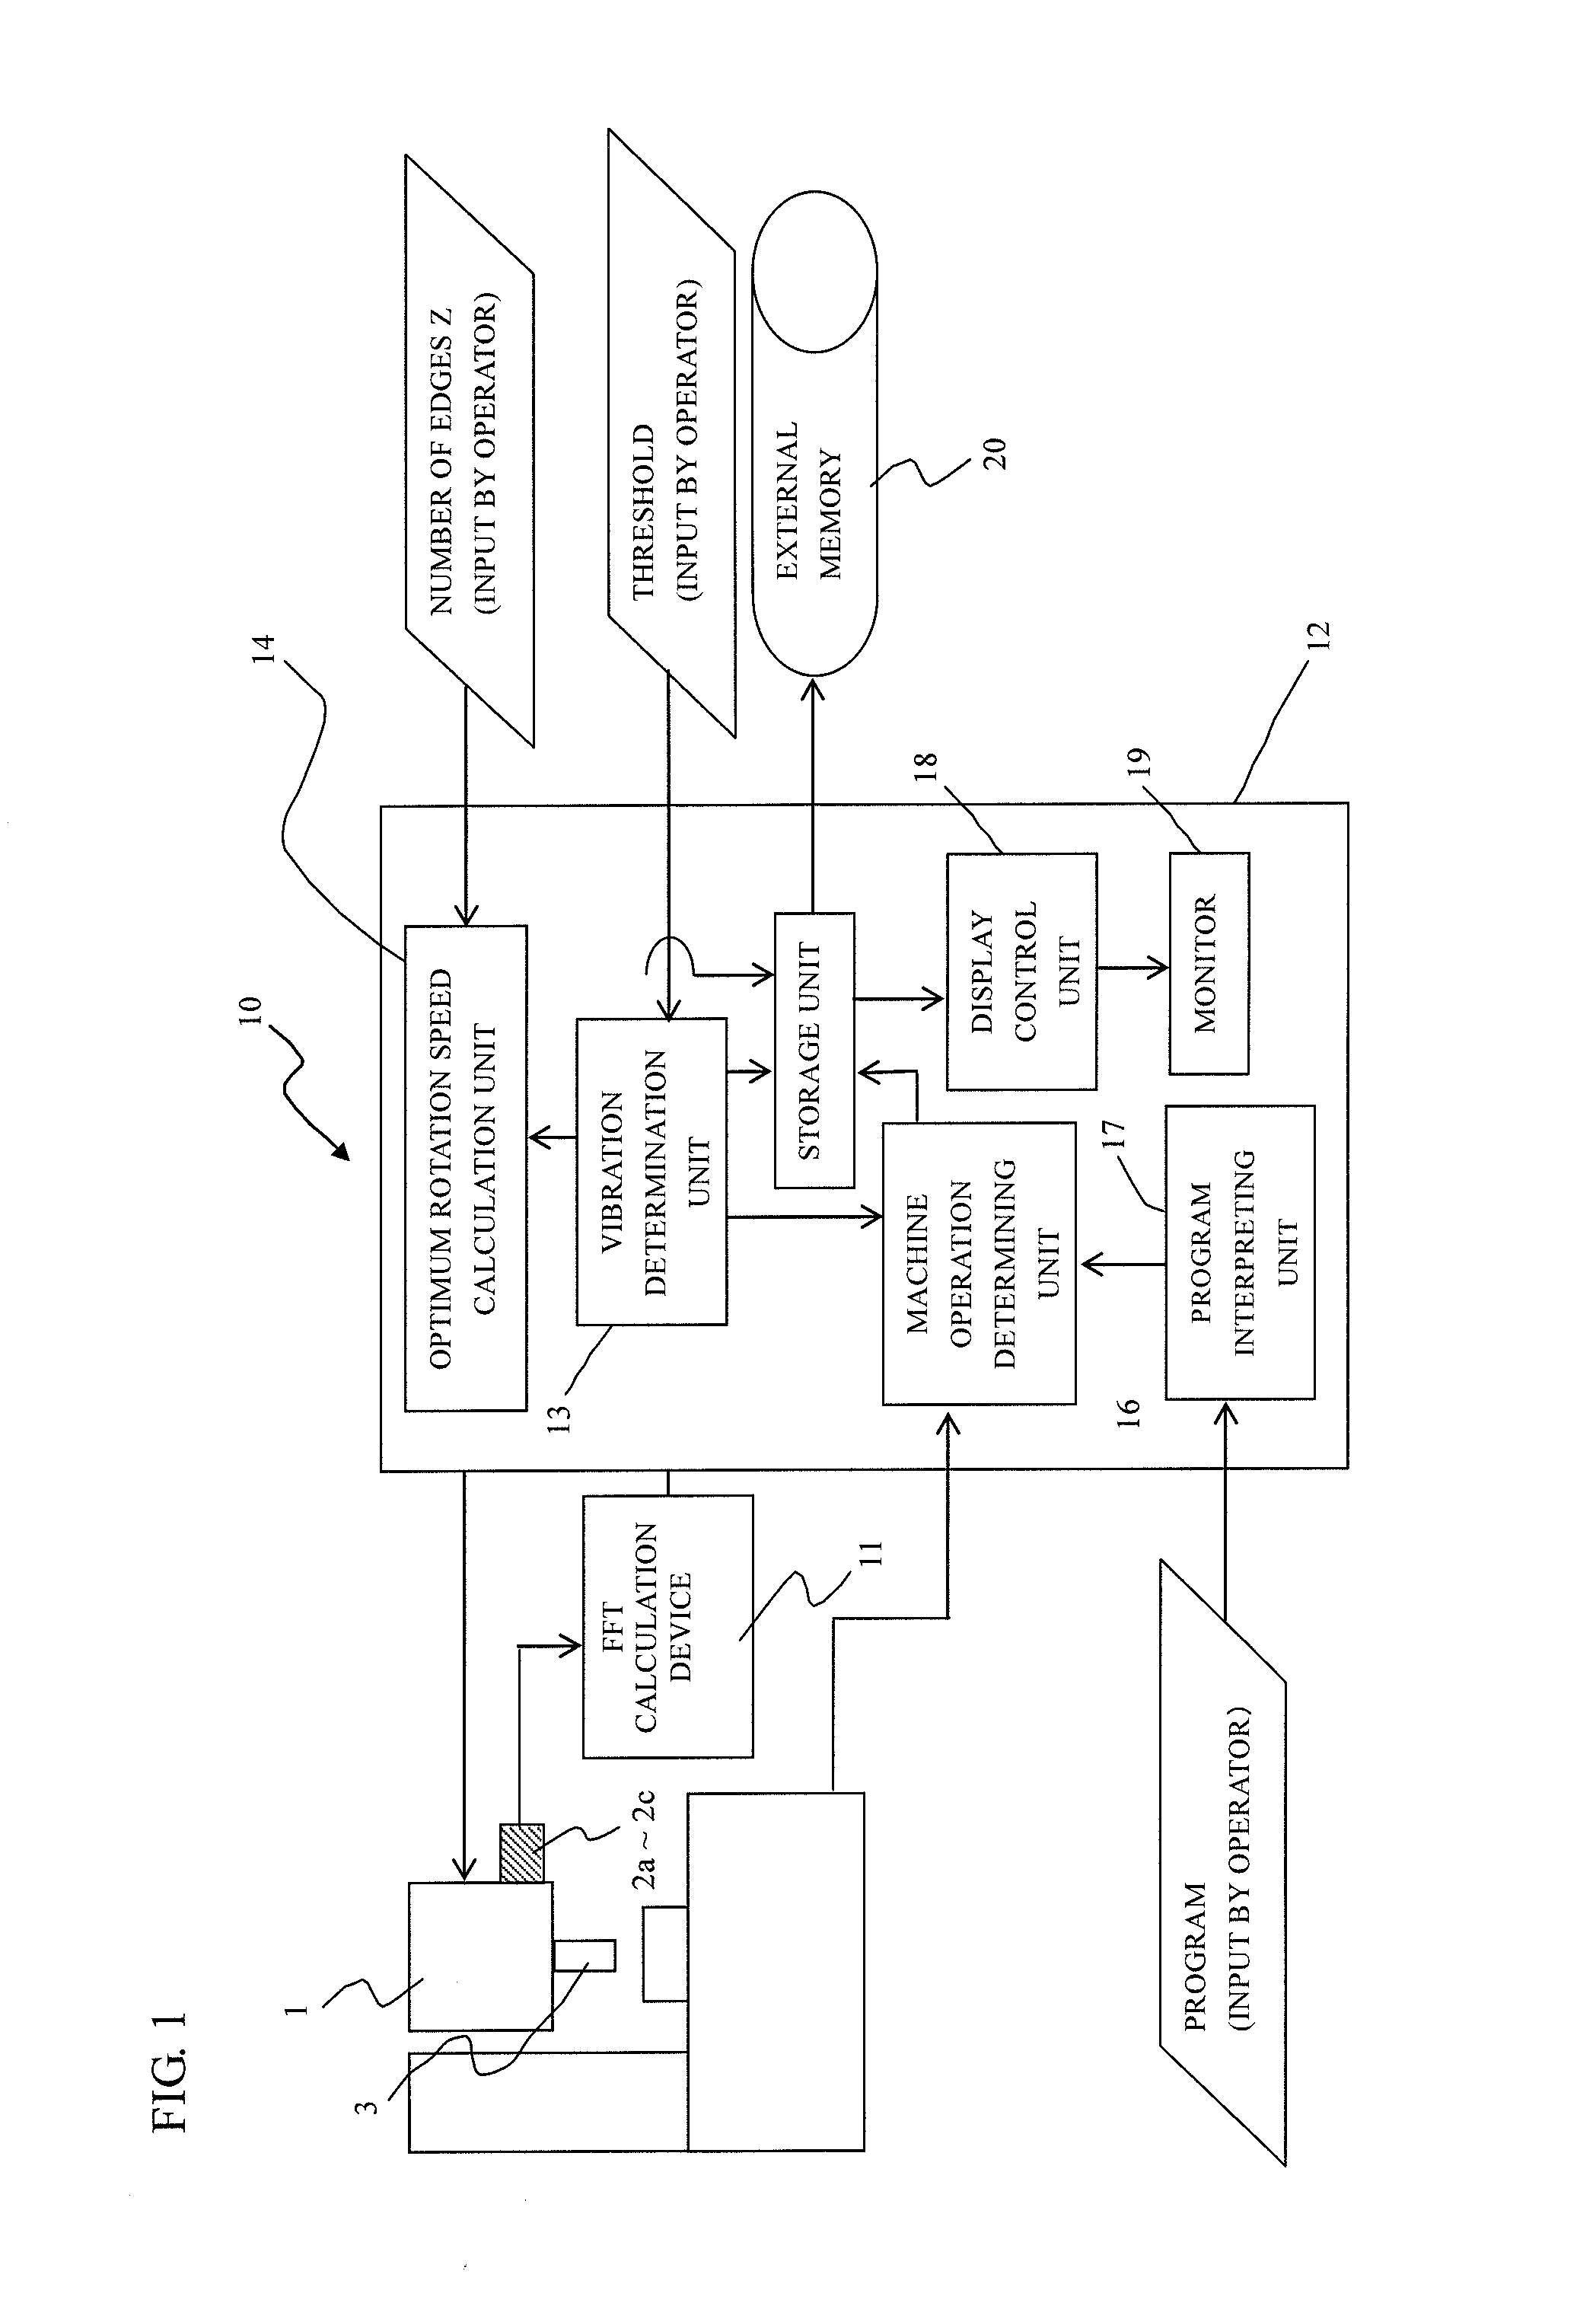 Vibration information display device for machine tool